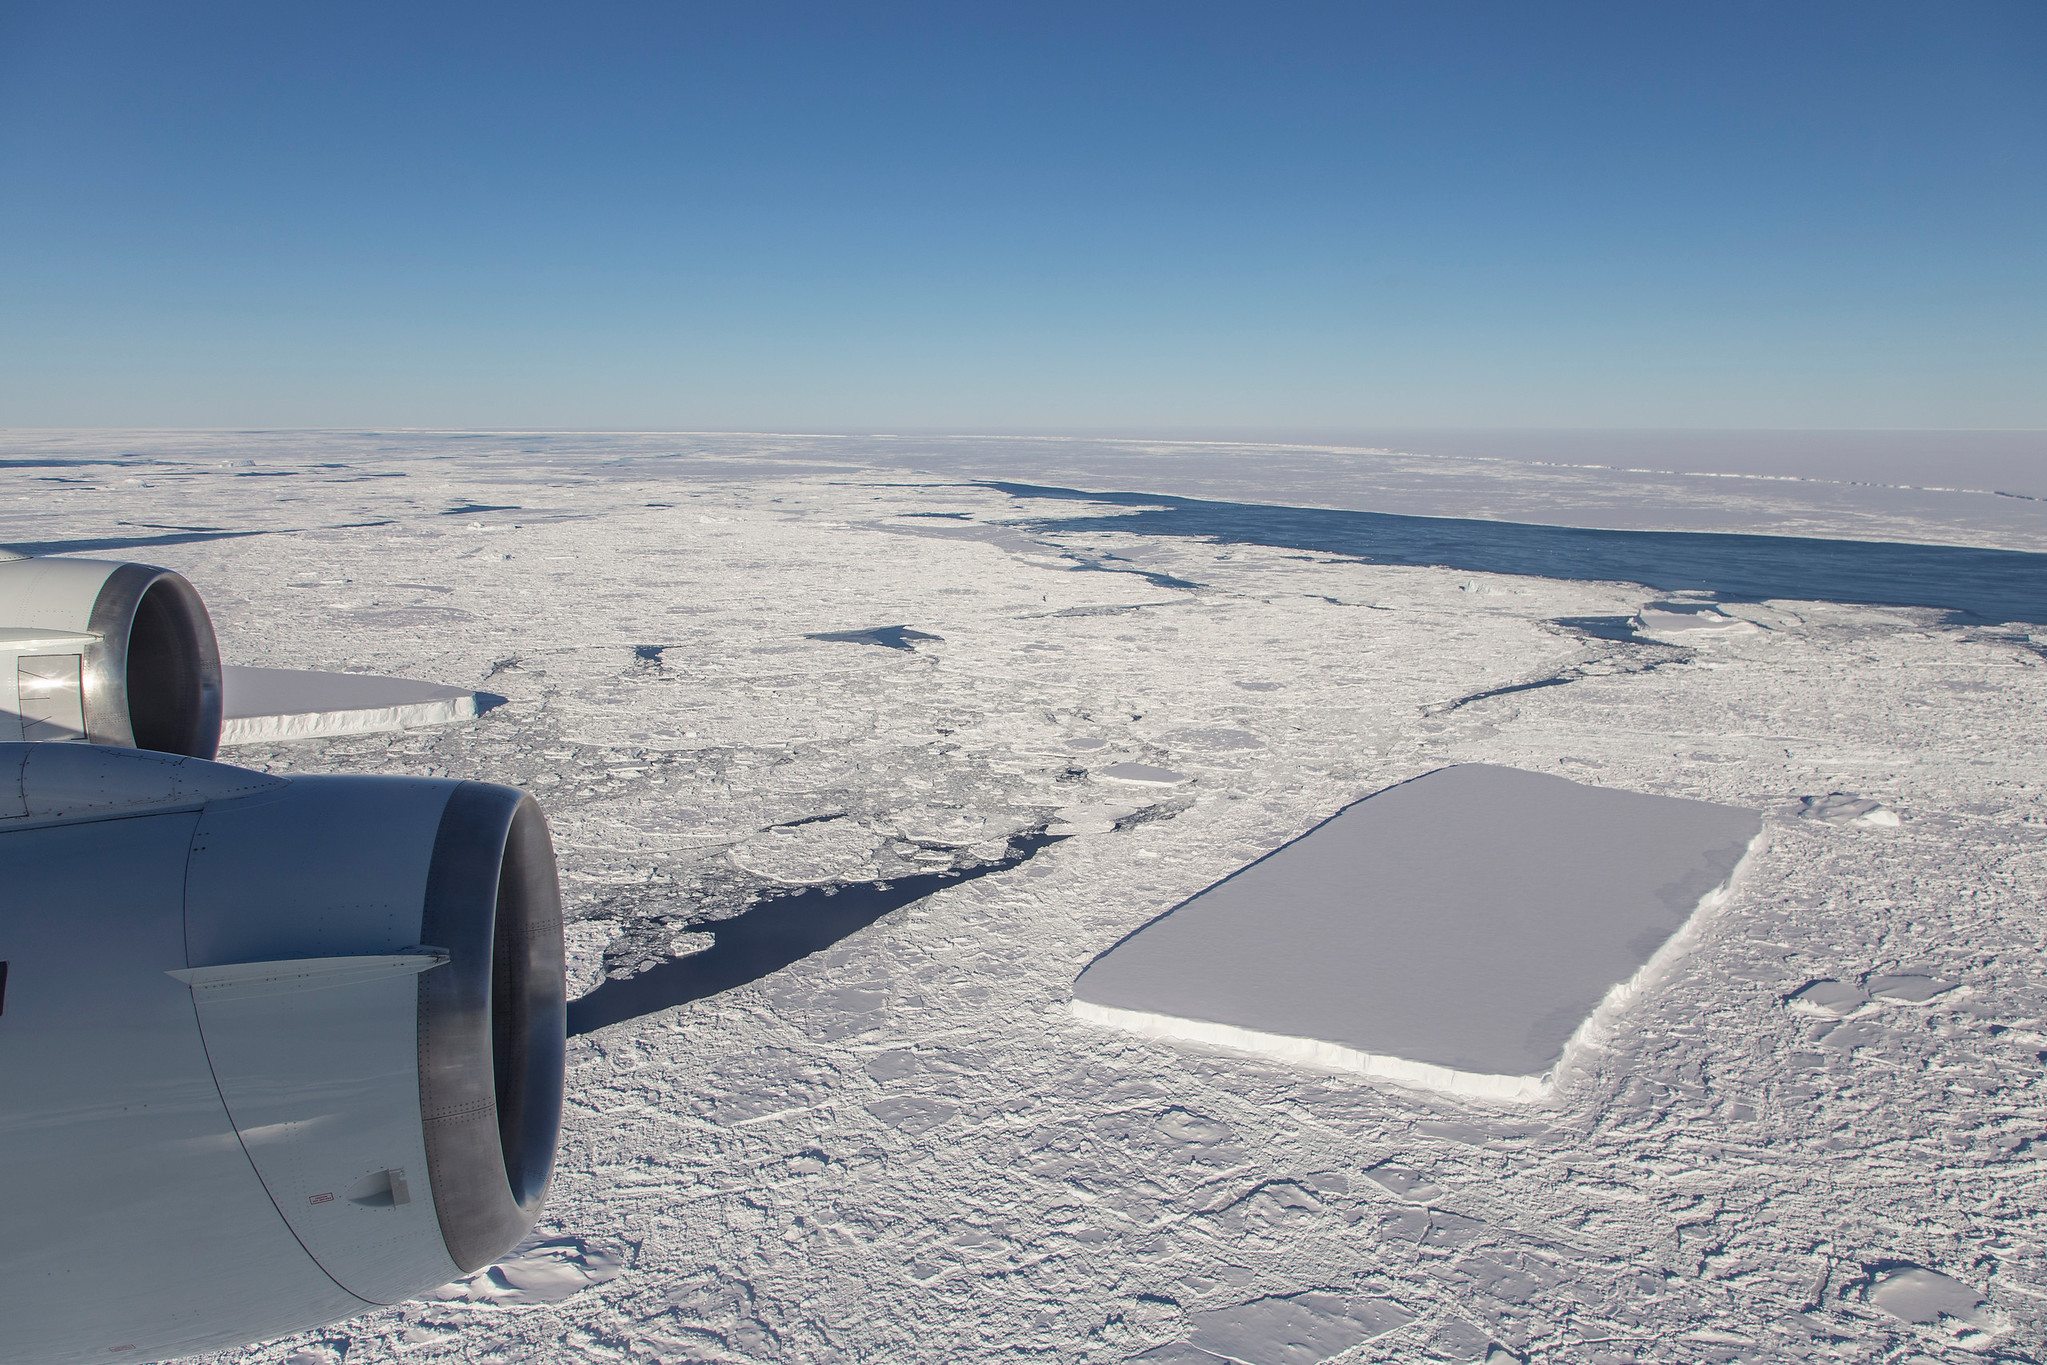 This photo, taken during an Operation IceBridge flight over the northern Antarctic Peninsula on Oct. 16, 2018, shows another relatively rectangular iceberg near the famous sharp-cornered berg, which is visible behind the plane's outboard engine. The huge, tabular iceberg A68 is visible in the distance.